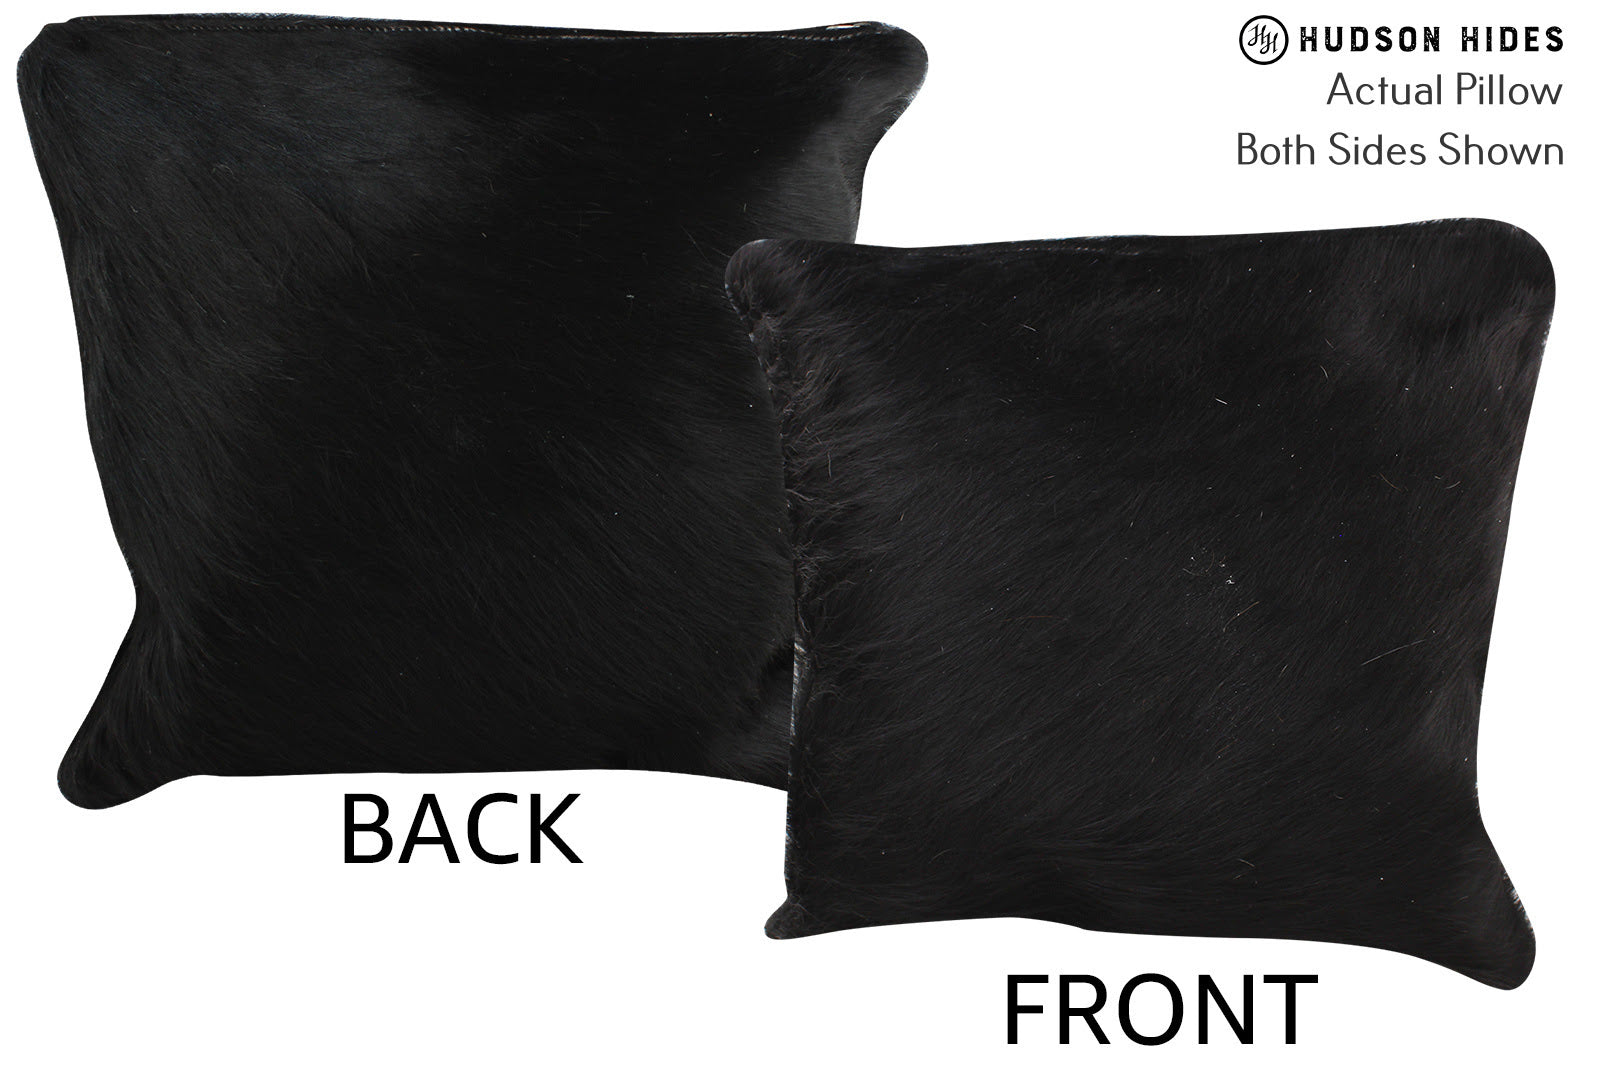 Solid Black Cowhide Pillow #74859